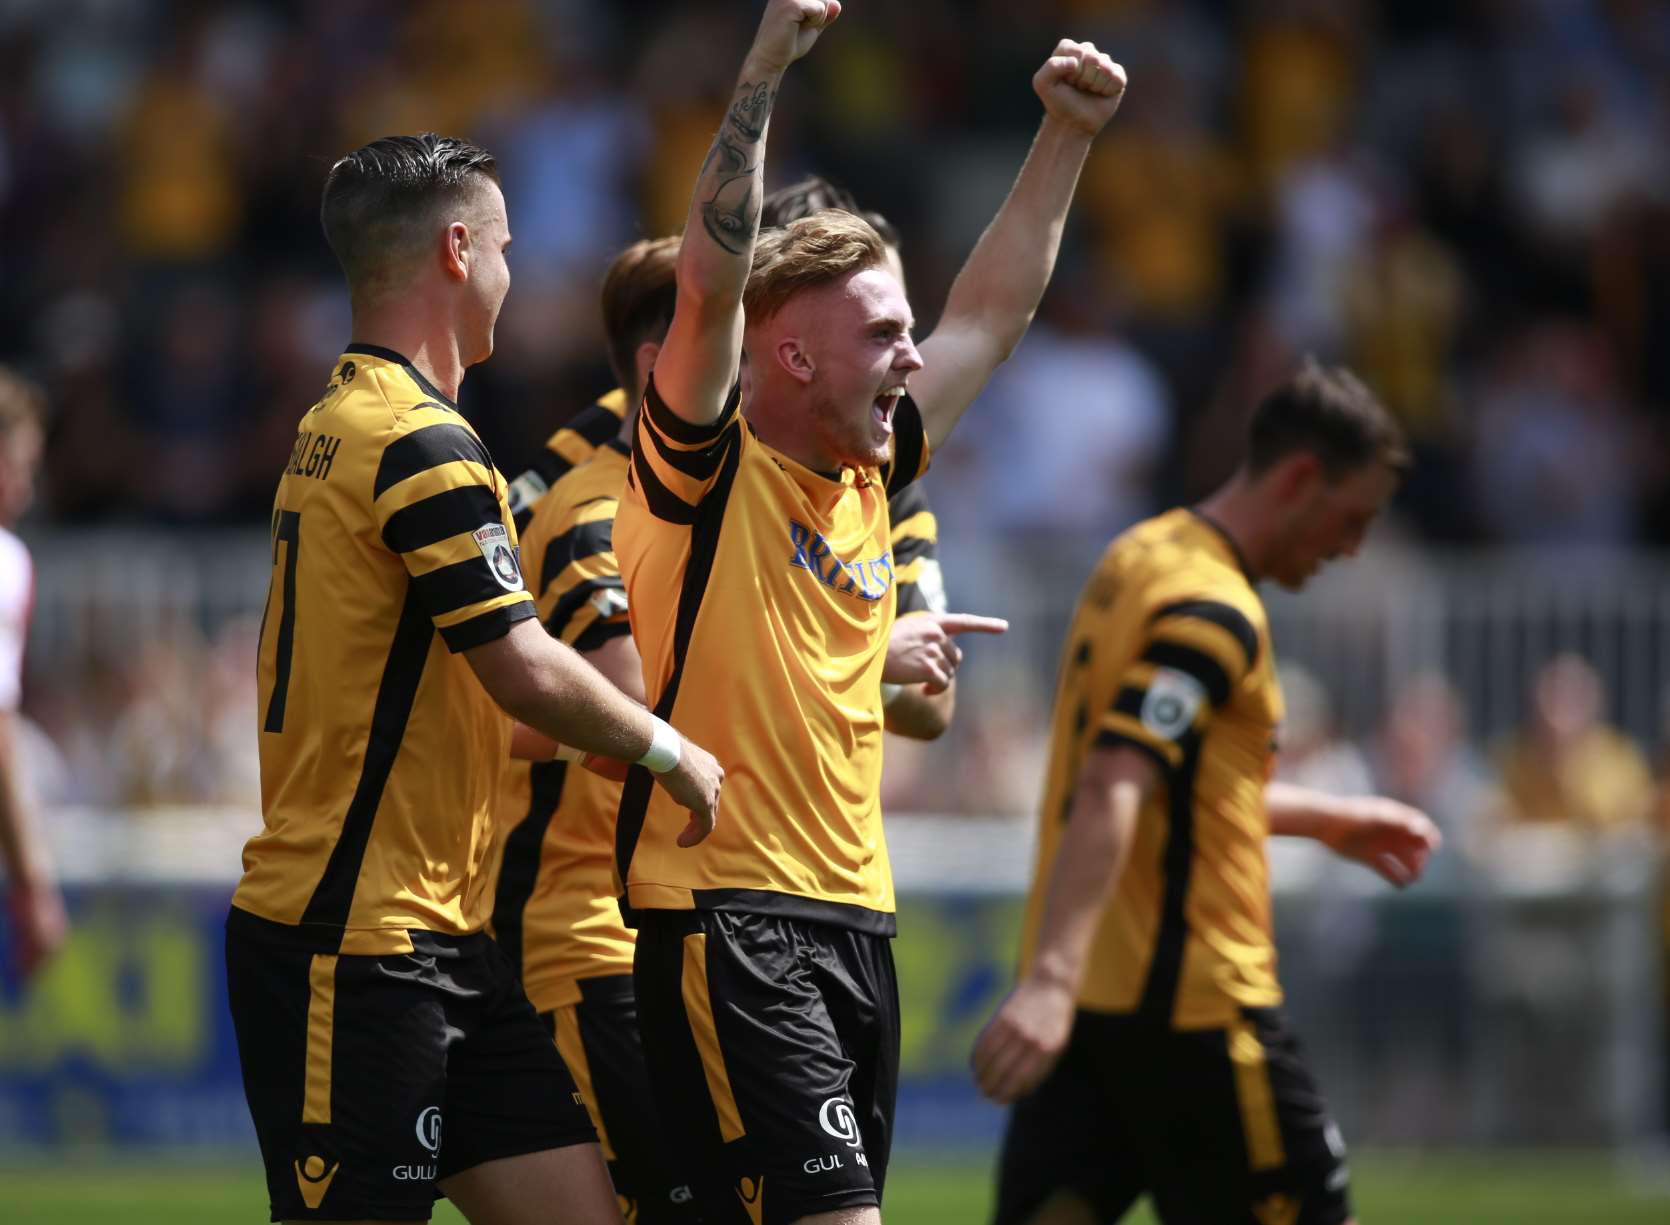 Bobby-Joe Taylor celebrates giving Maidstone the lead Picture: Martin Apps